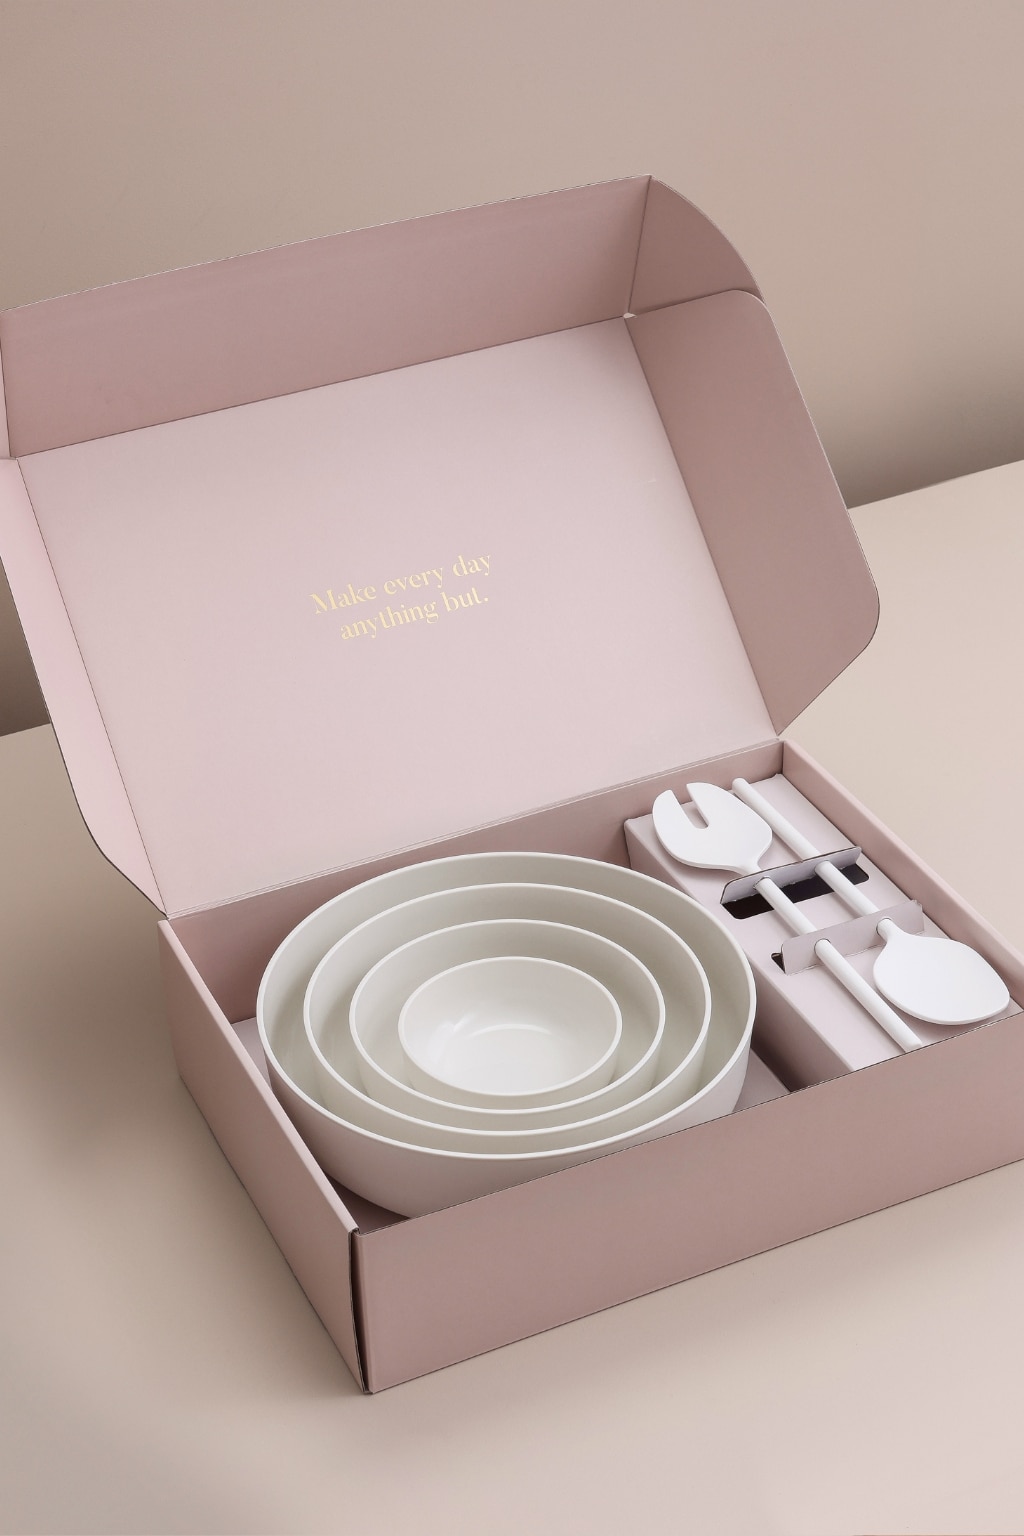 Ultimate Gift Pack in Dune, a 4 piece Nesting Bowl Set + Salad Servers packaged in a limited edition Gift Box, the perfect present to spoil your loved ones.